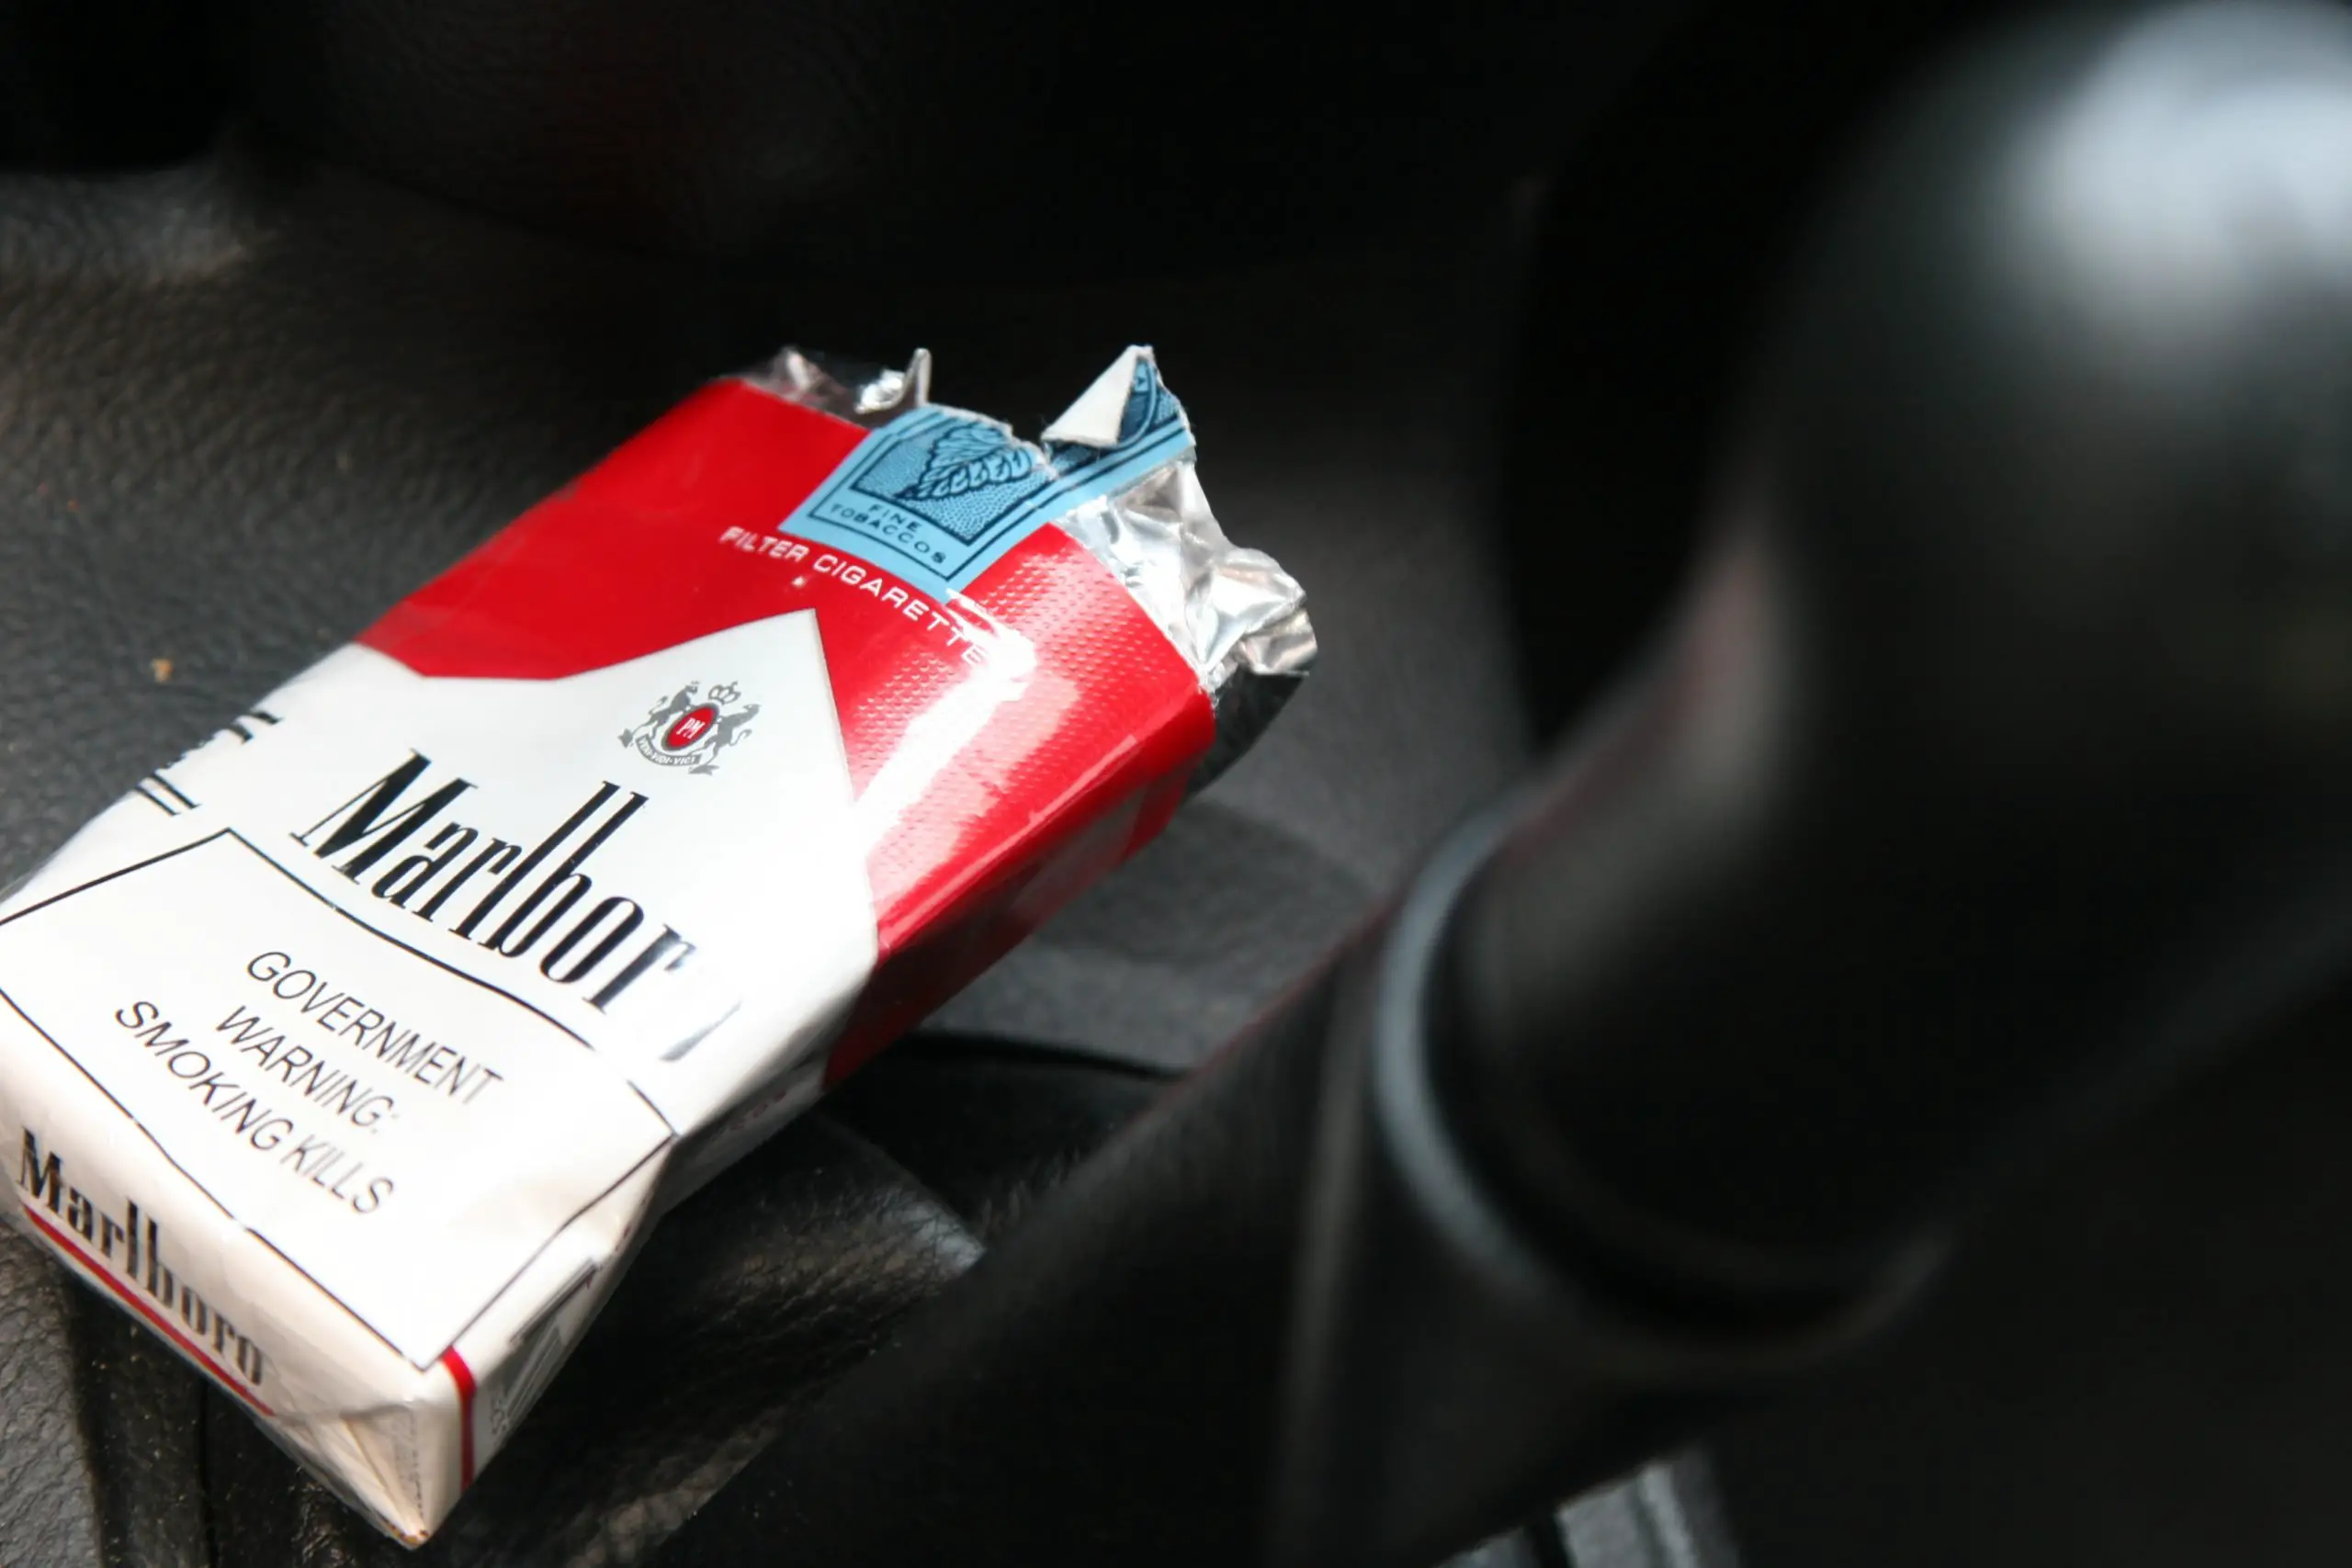 The Best Way to Get Rid of Tobacco Odors in Cars